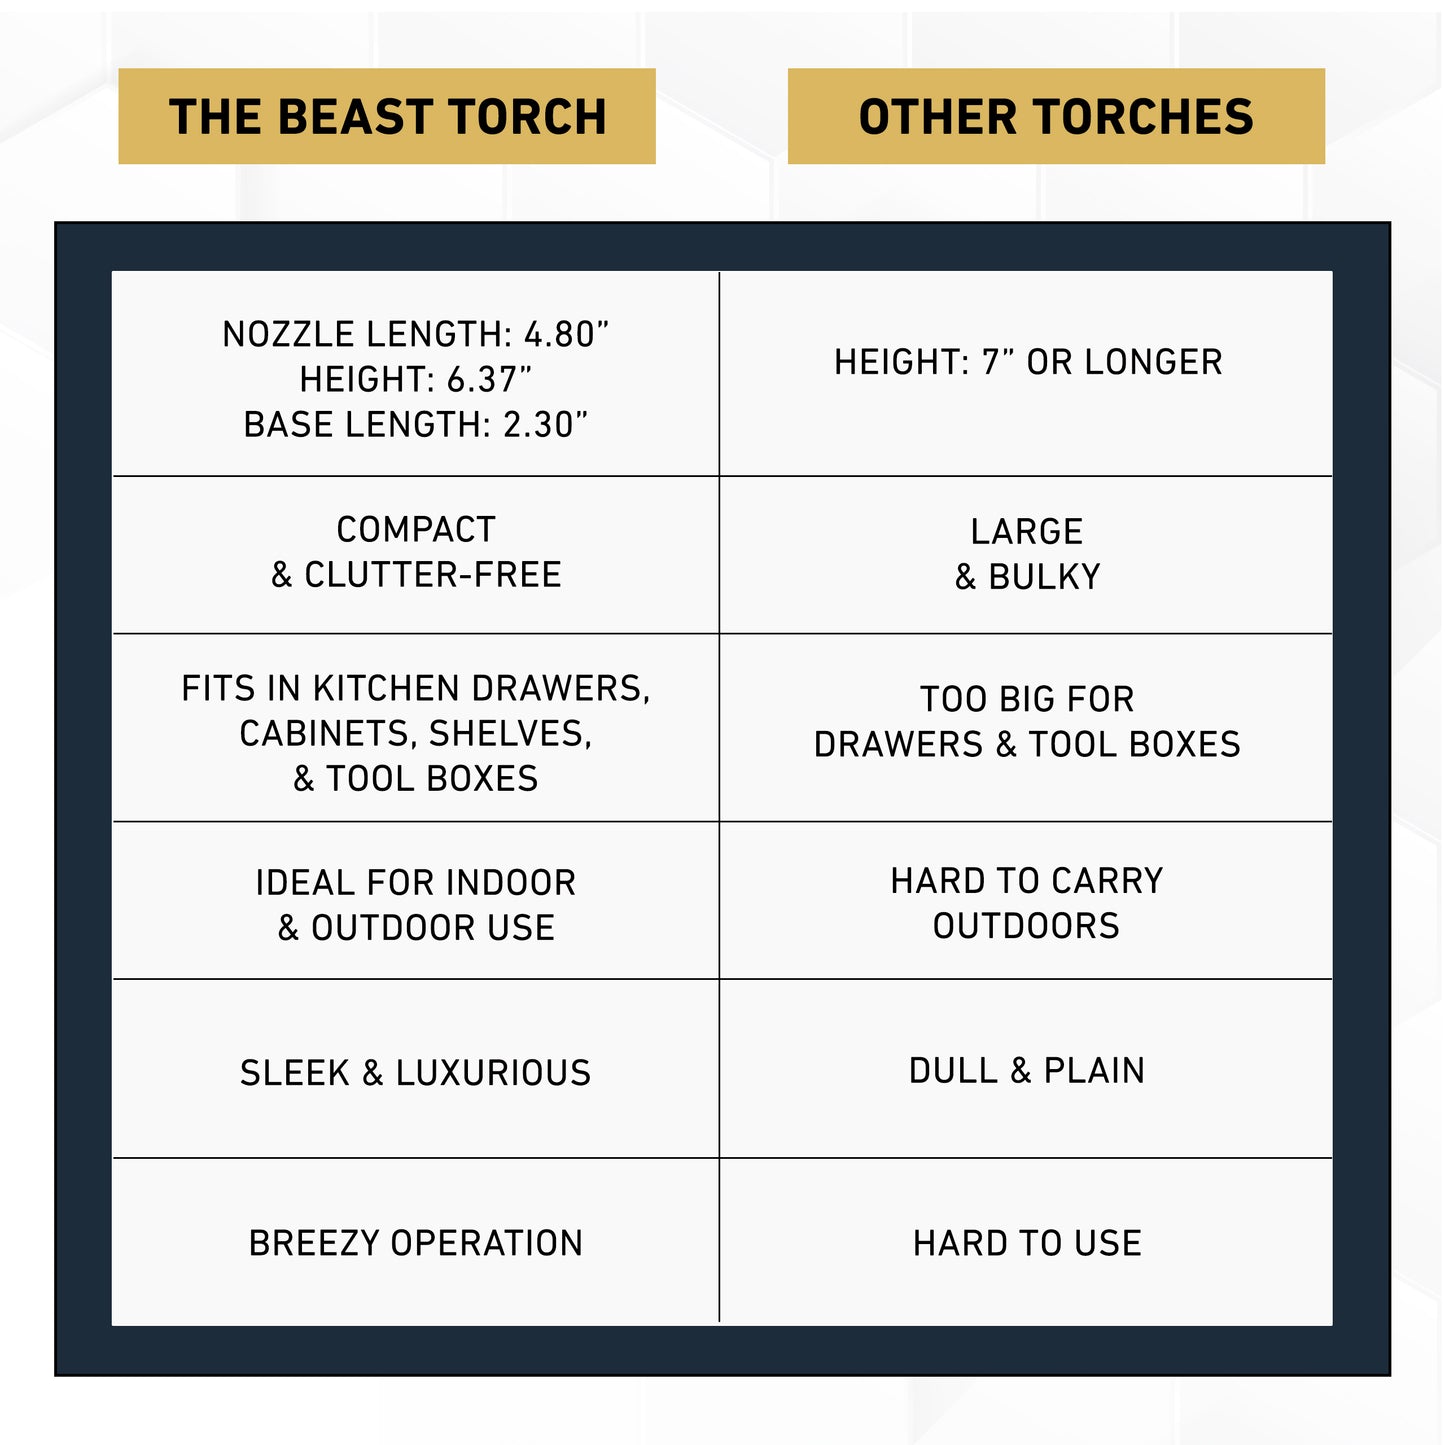 The Beast Torch